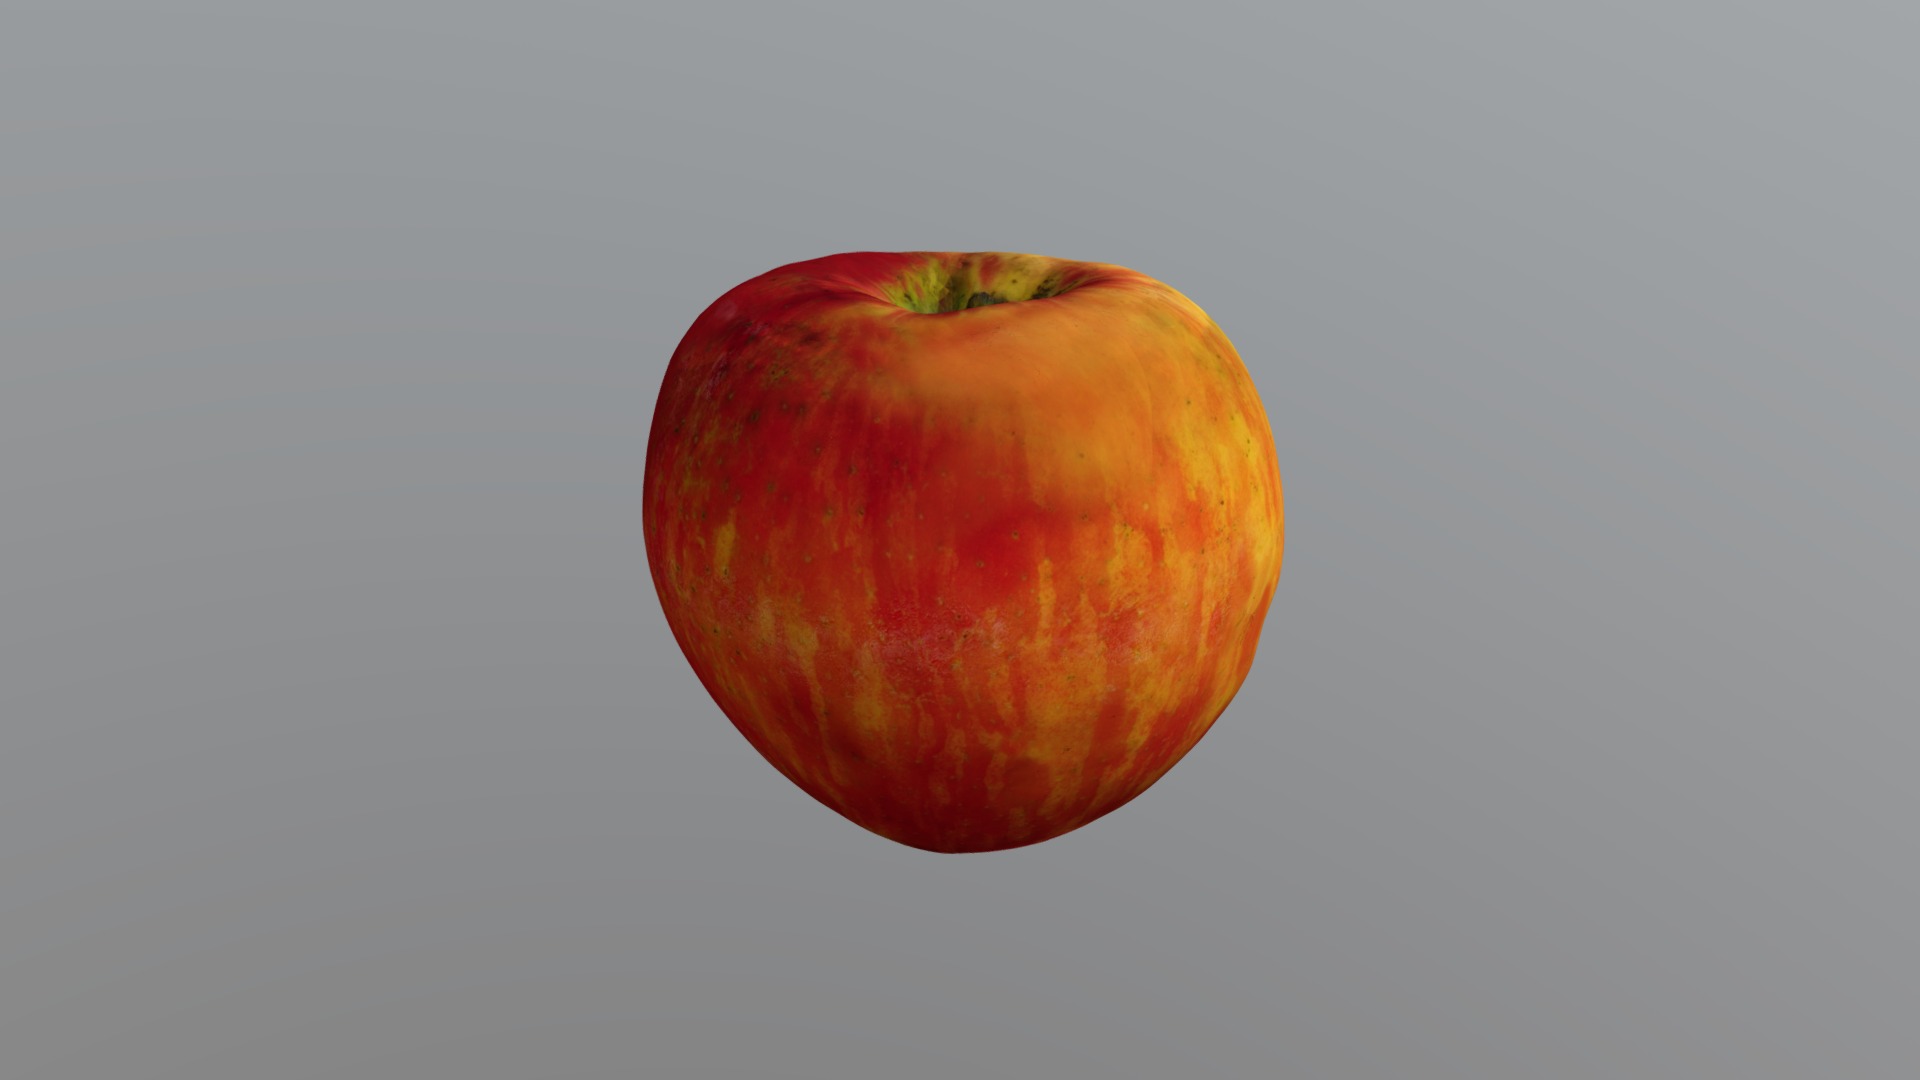 3D model Honeycrisp Apple - This is a 3D model of the Honeycrisp Apple. The 3D model is about a red apple with a green stem.